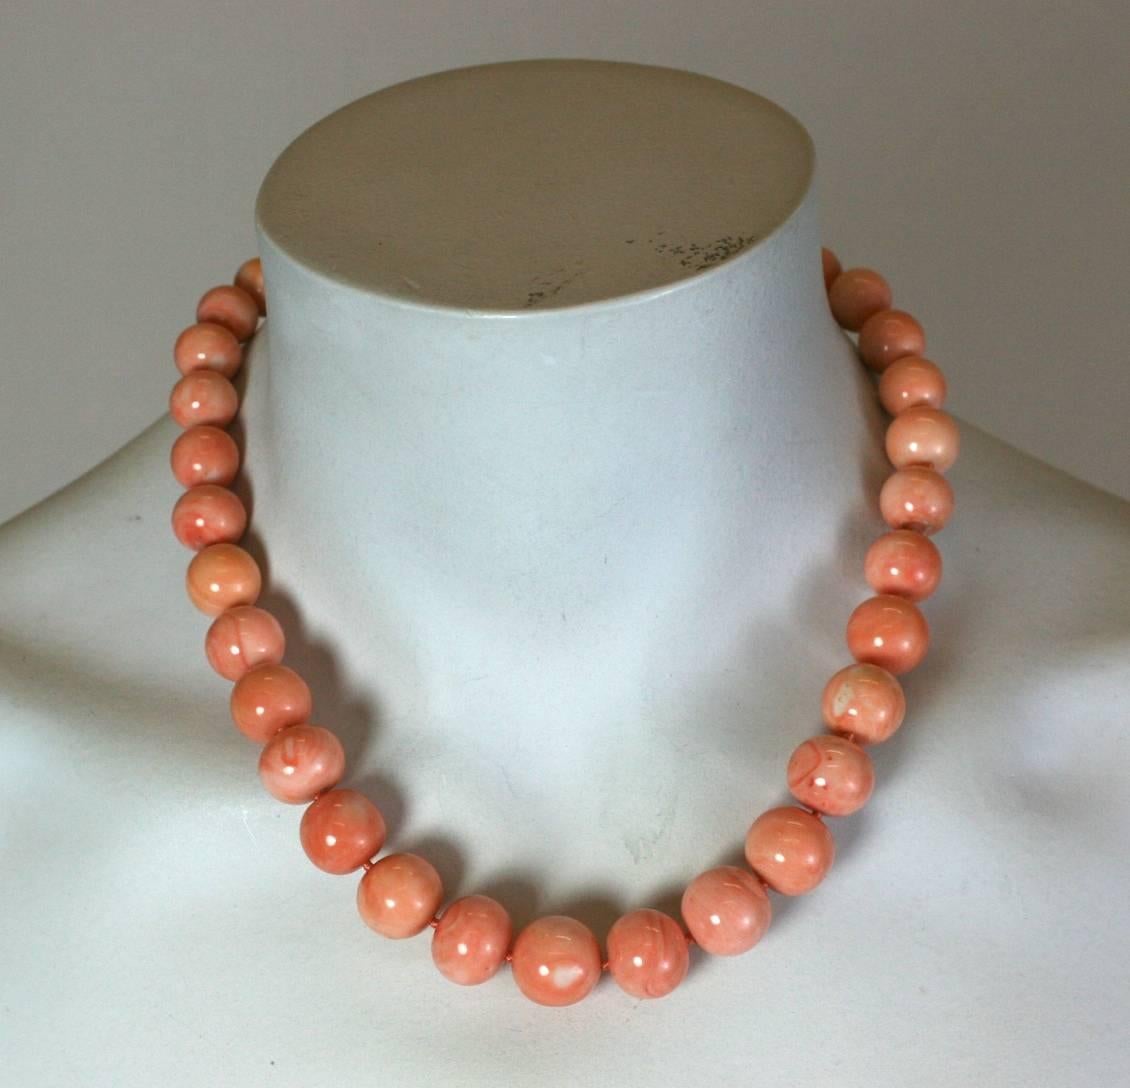 Elegant Natural Coral Beads in marbleized, pink and creamsicle tones. Elegant etched 18k gold clasp with central coral cabochon and 6 bezel set diamonds. 1960's USA. 
Excellent condition and substantial bead size. 
17